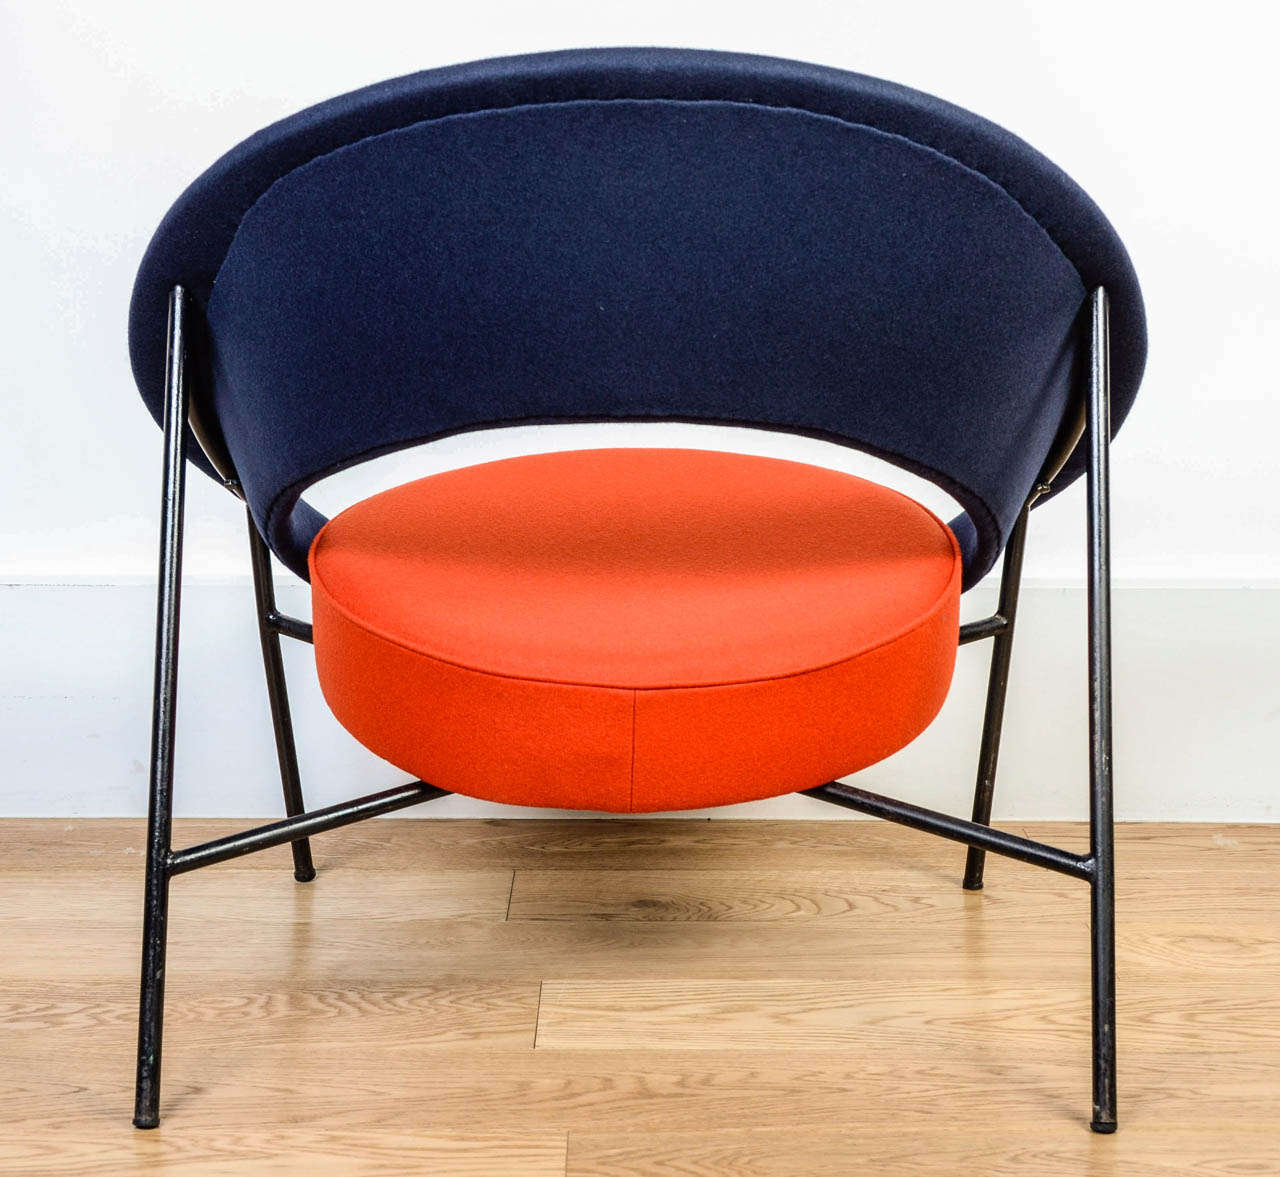 Lacquered Pair of Armchairs 44 by Dangles & Defrance - Burov Edition - 1957